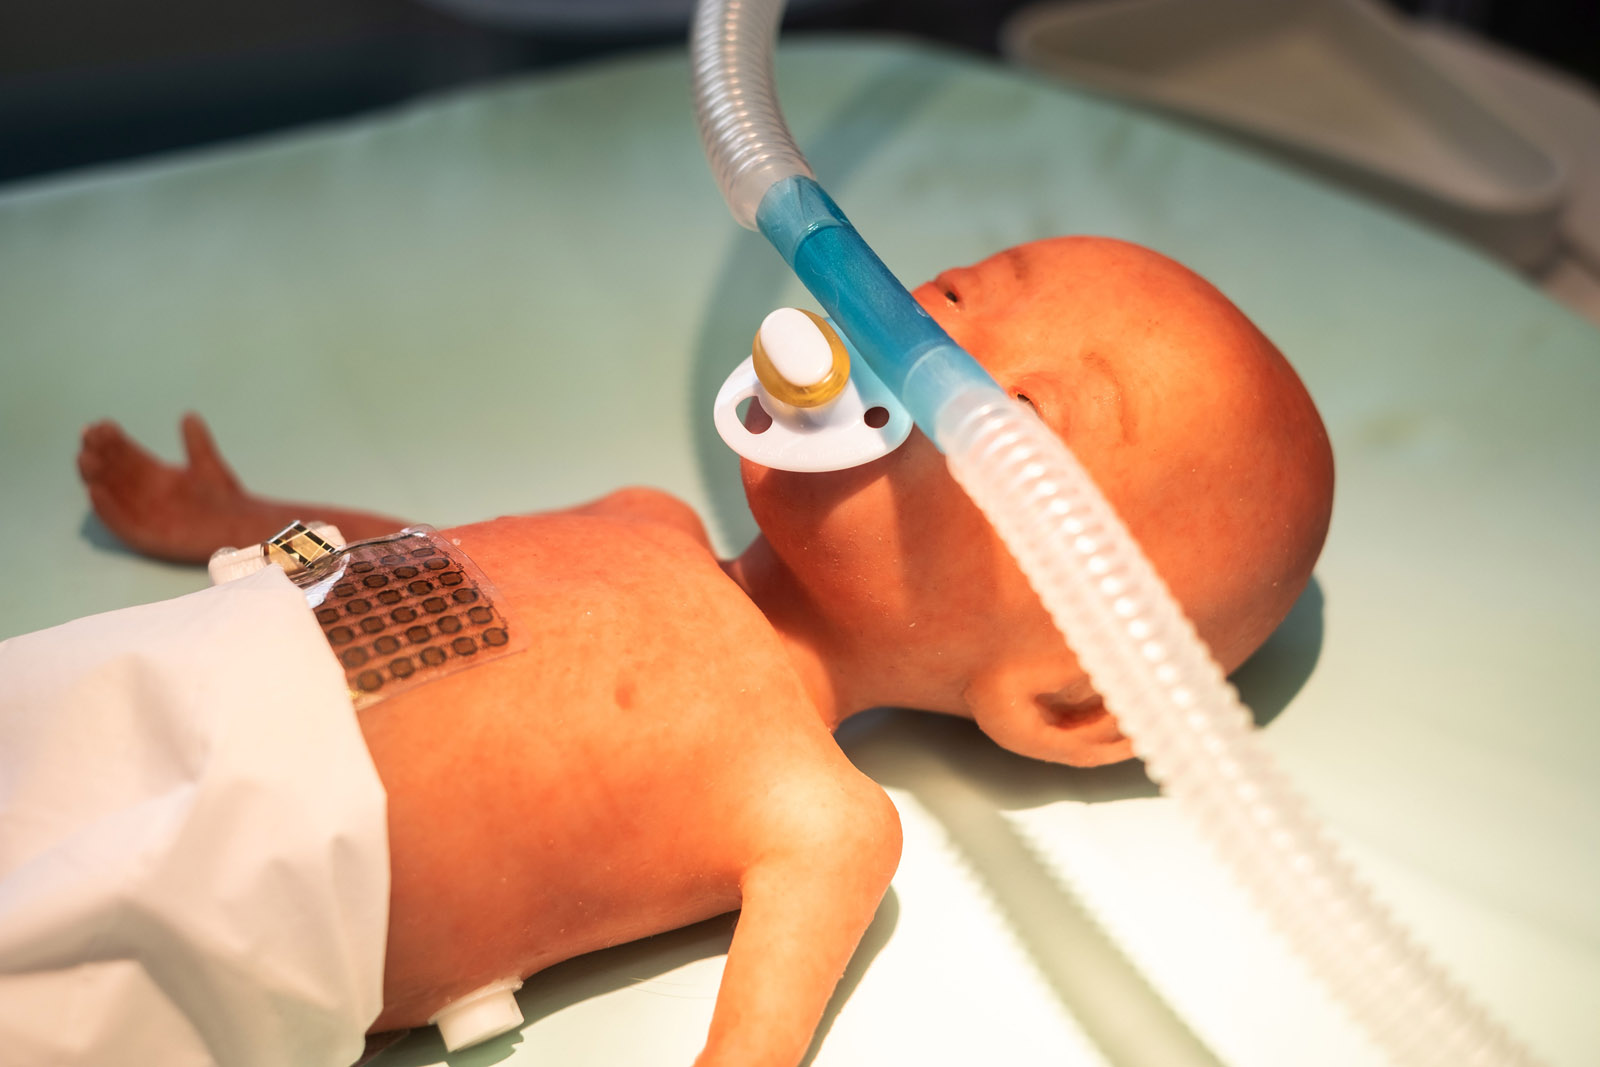 Demonstrator: Sensor film and nasal prong with integrated miniature aerosol valve on a preterm infant training dummy.